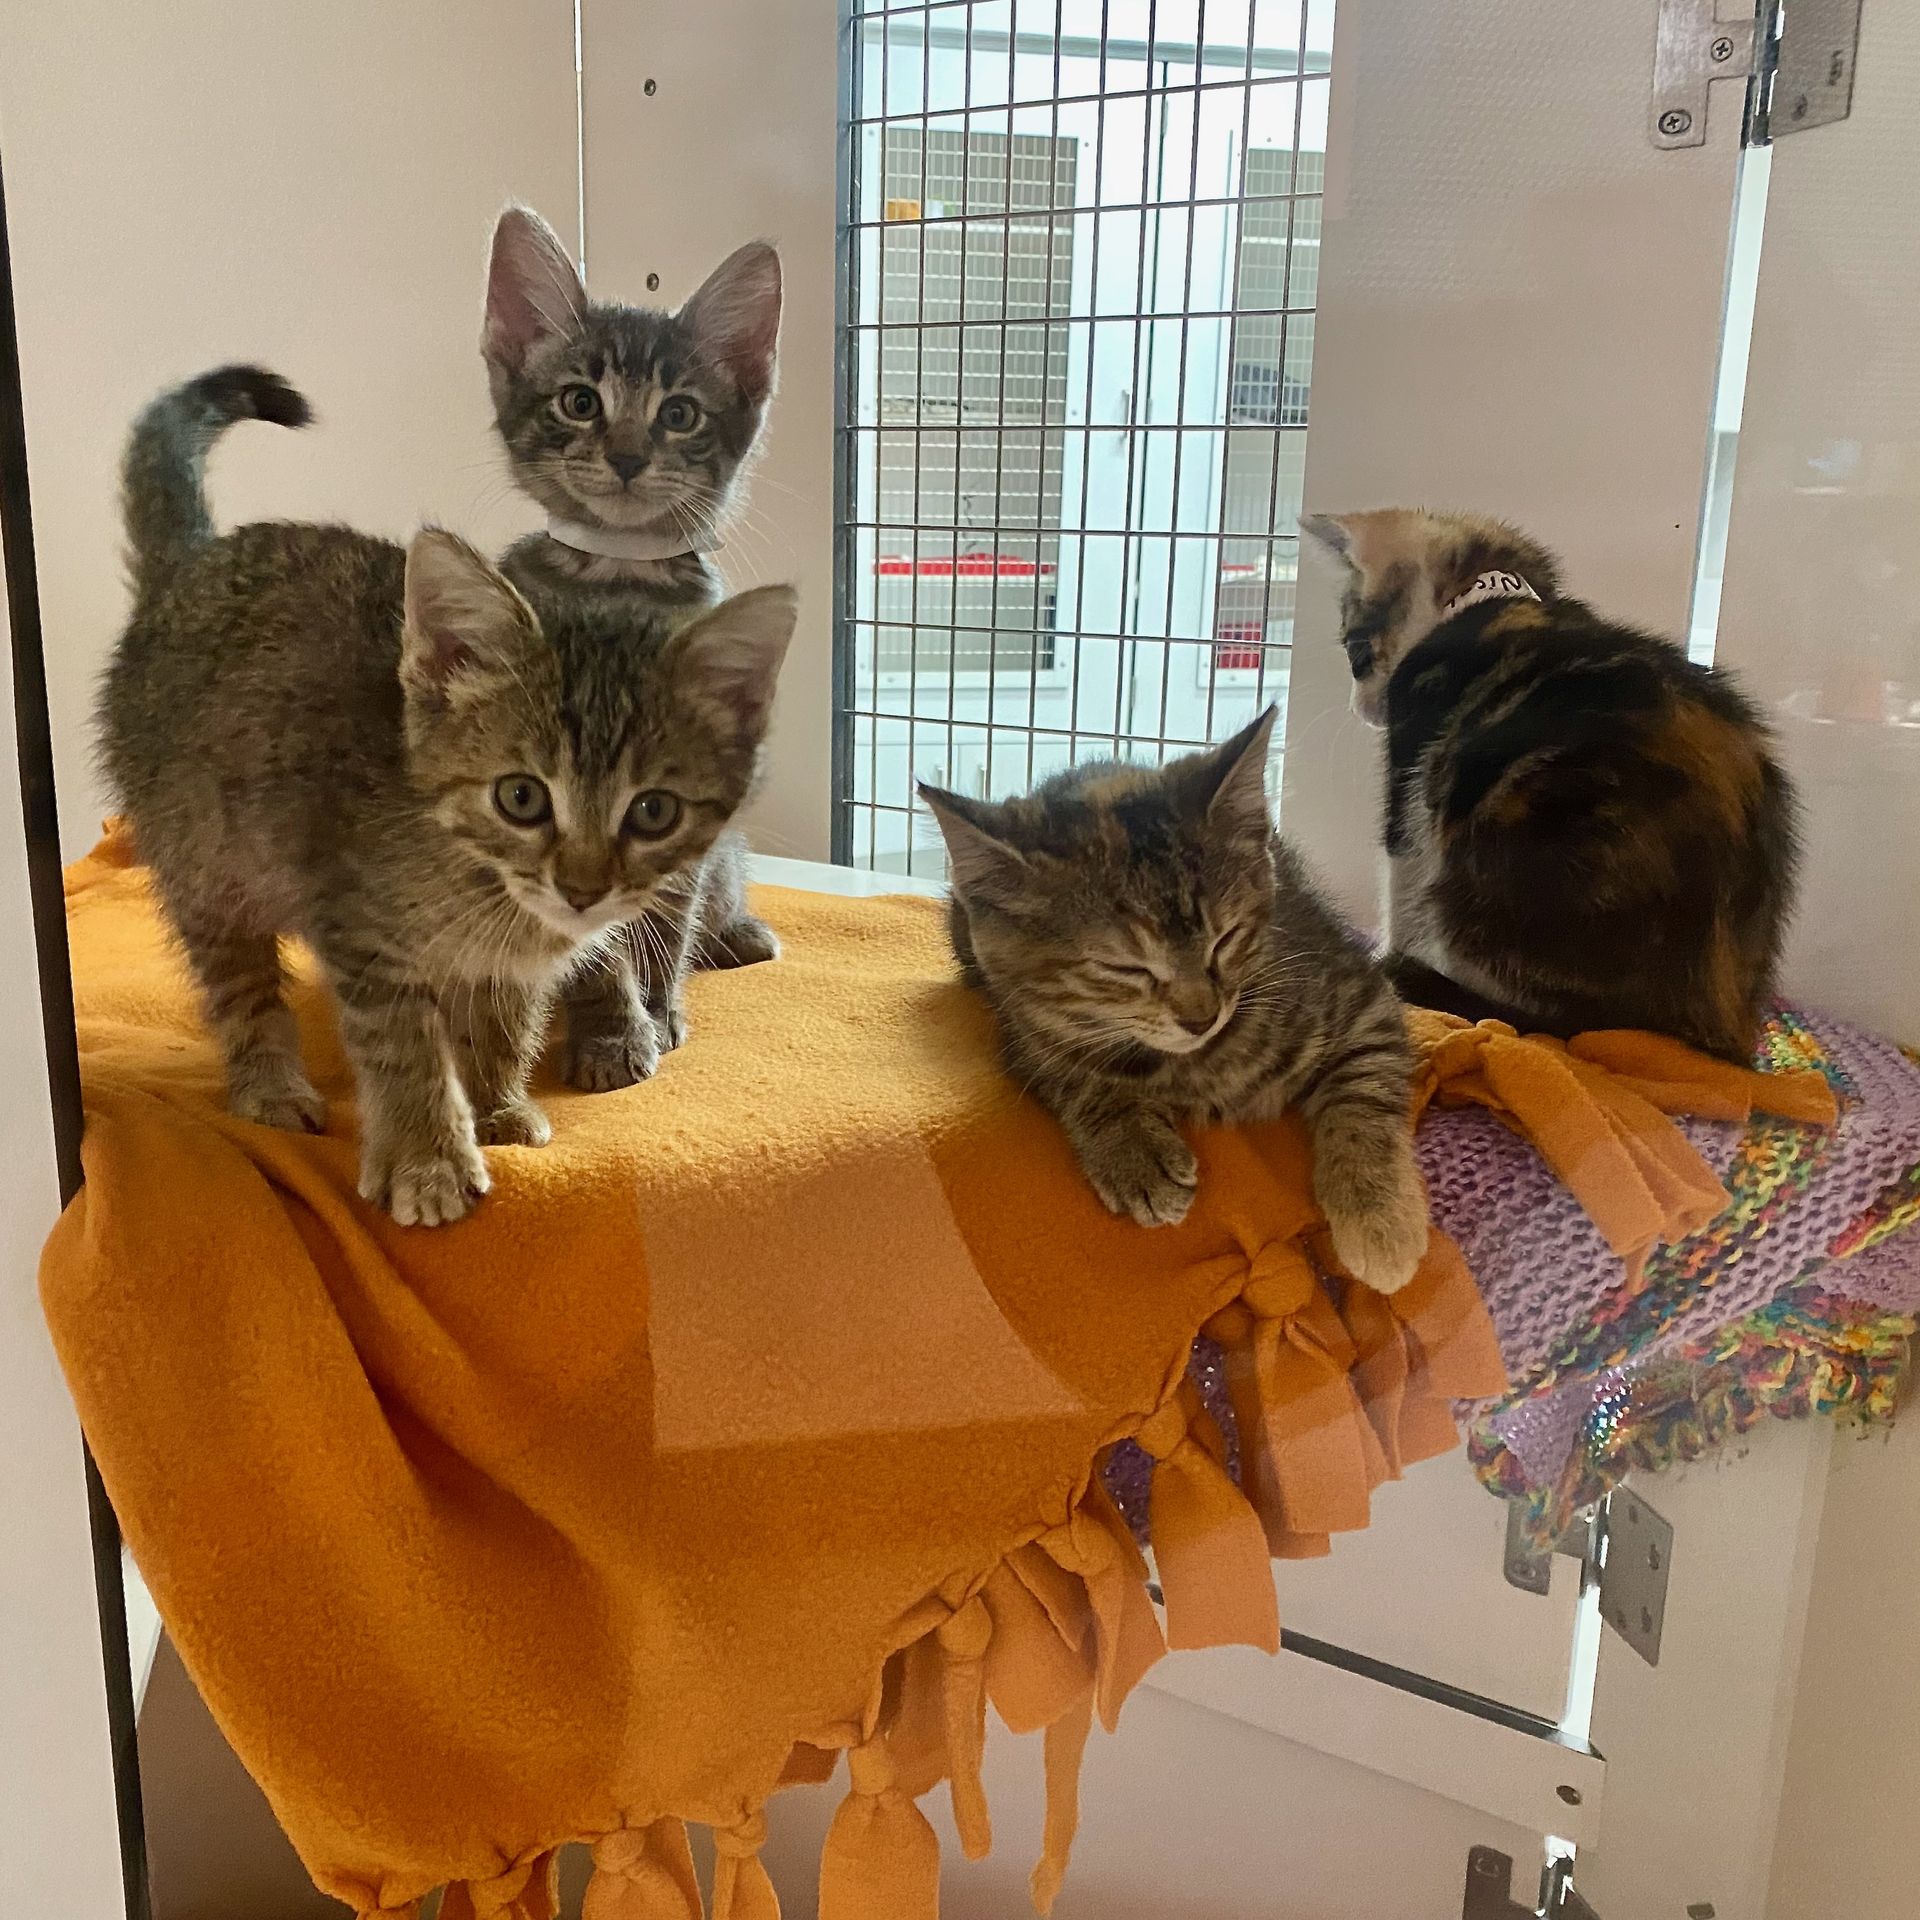 Four kittens standing on an orange blanket; two are alert, one is asleep and one has its back turned